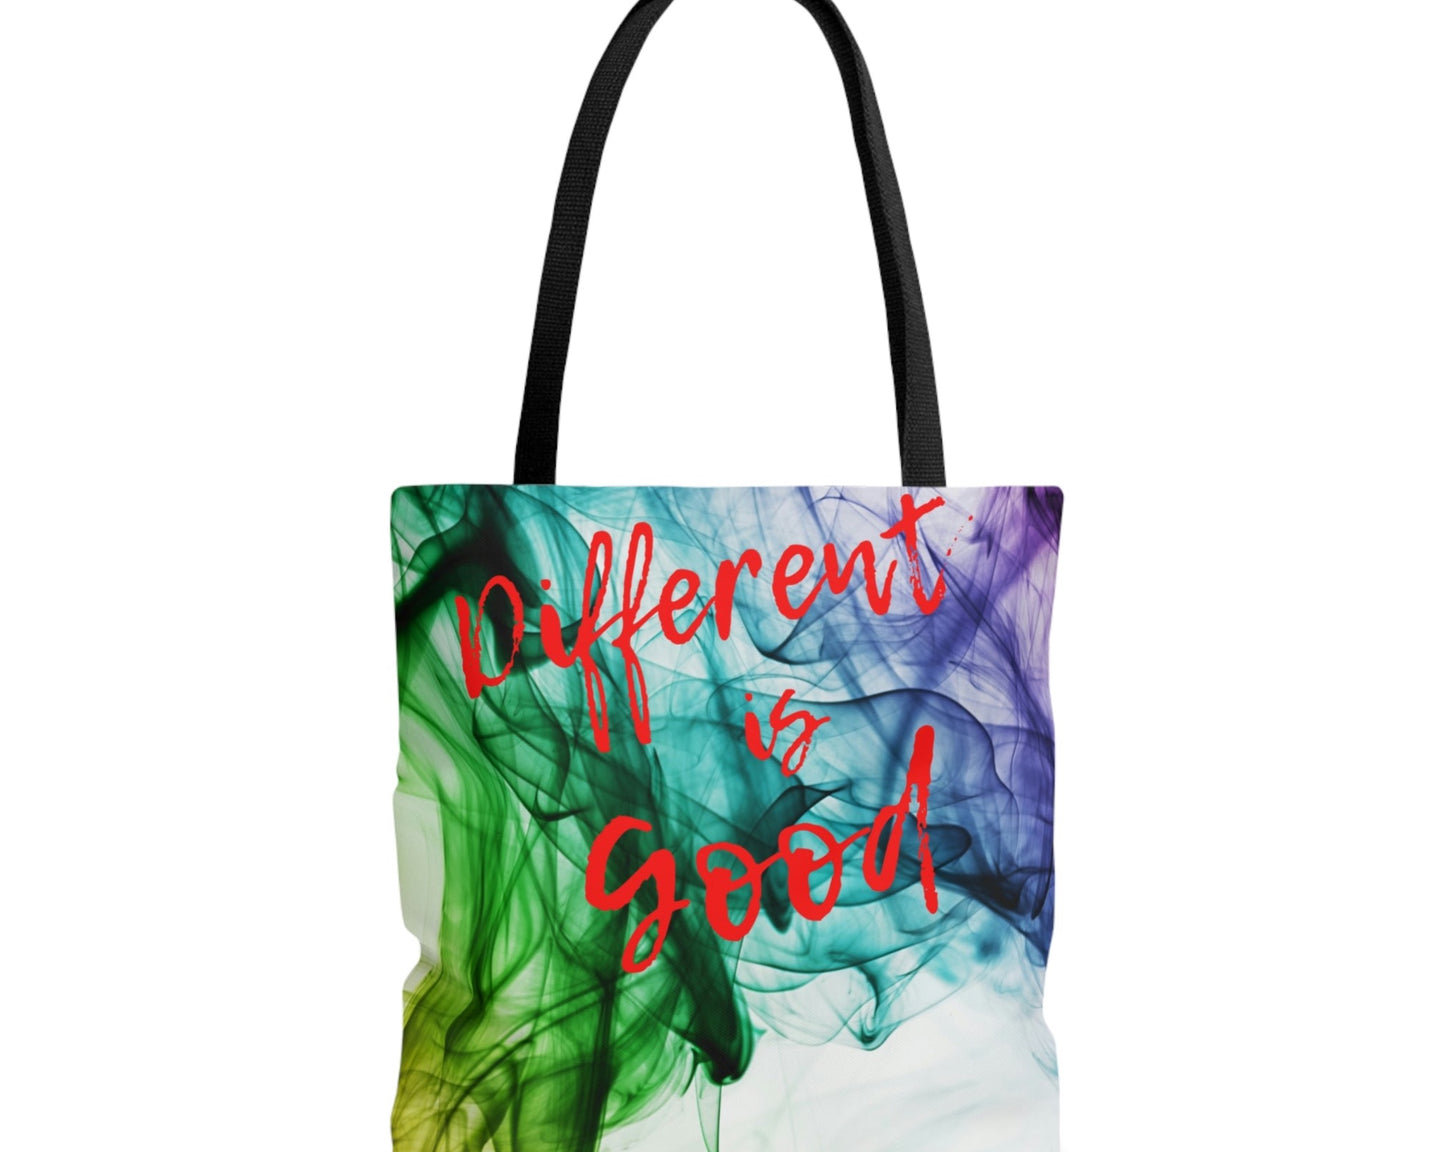 Different Is Good Tote Bag | BKLA | shoes & accessories | backpack, hat, phone cover, tote bags, clutch bags